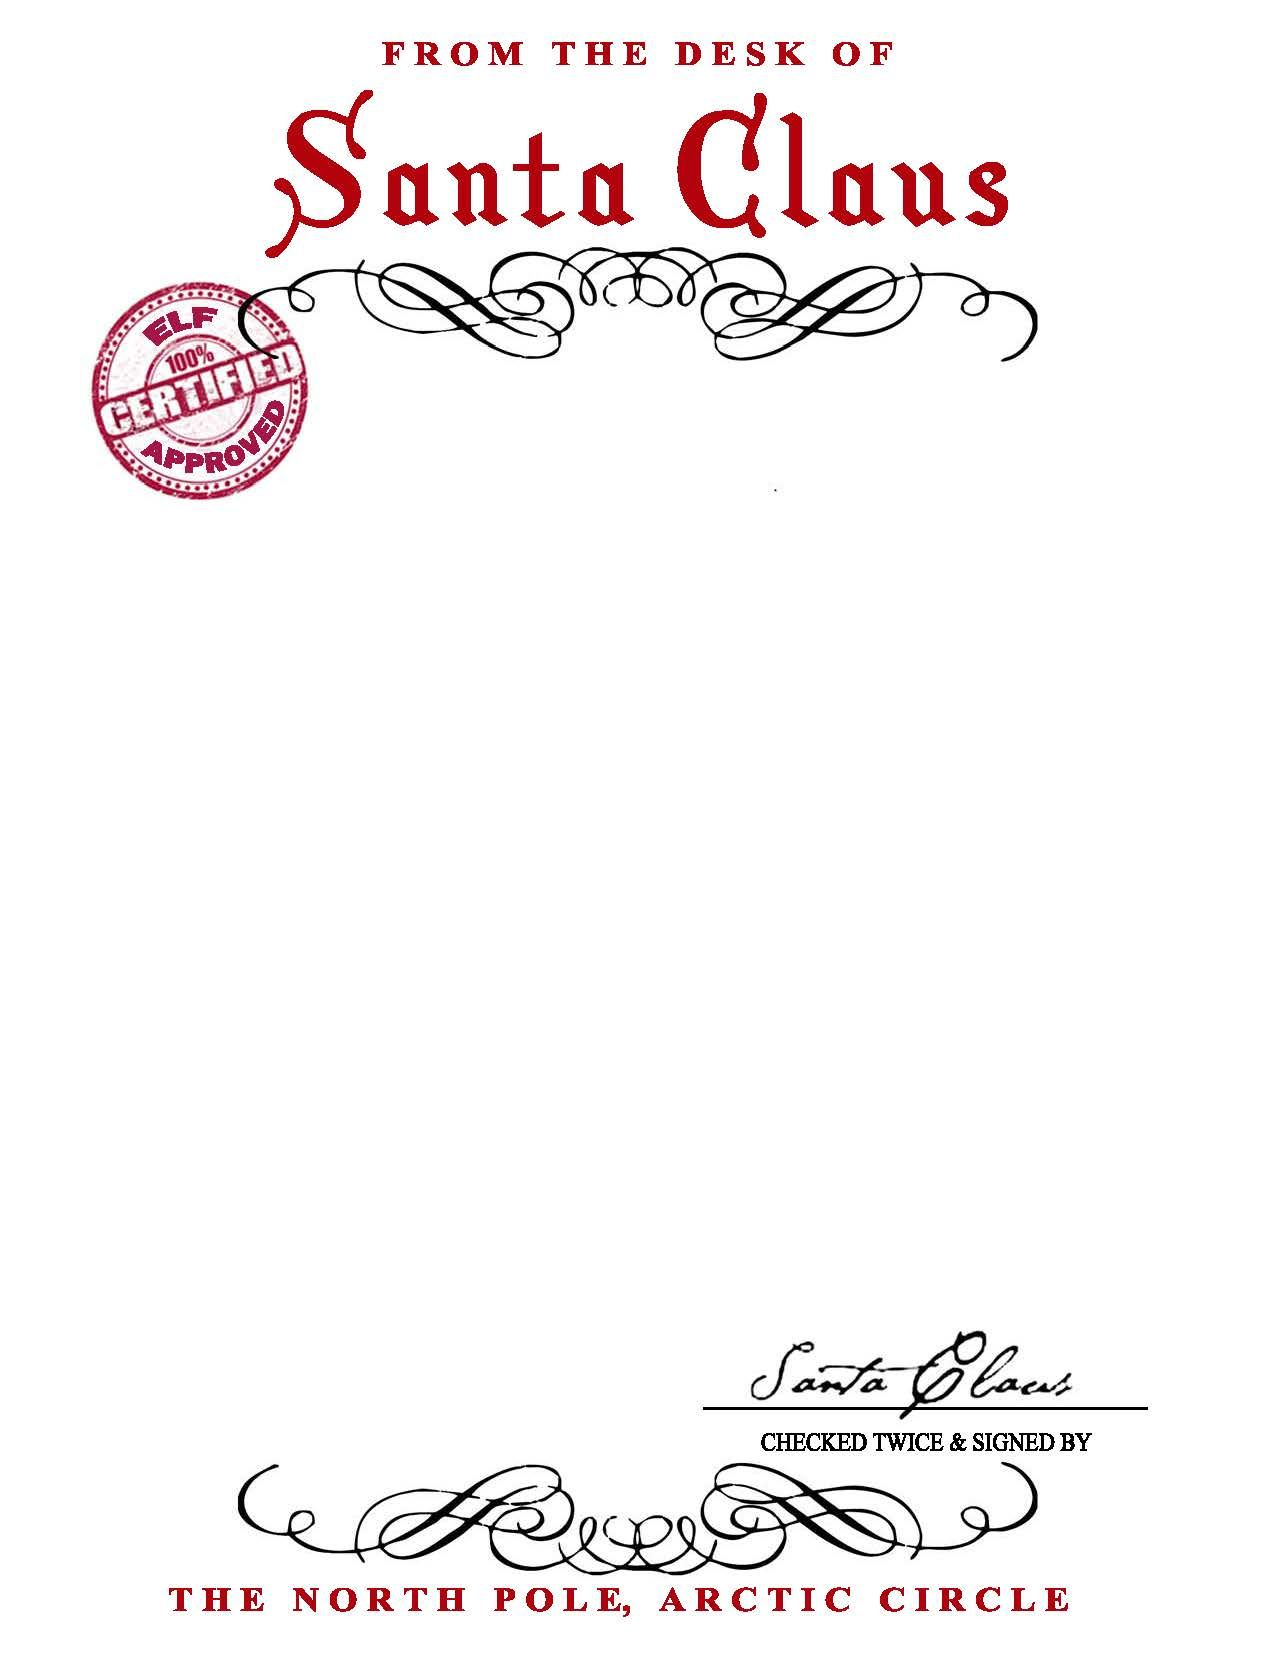 Santa Reply Letter Template - Santa Claus Letterhead Will Bring Lots Of Joy to Children